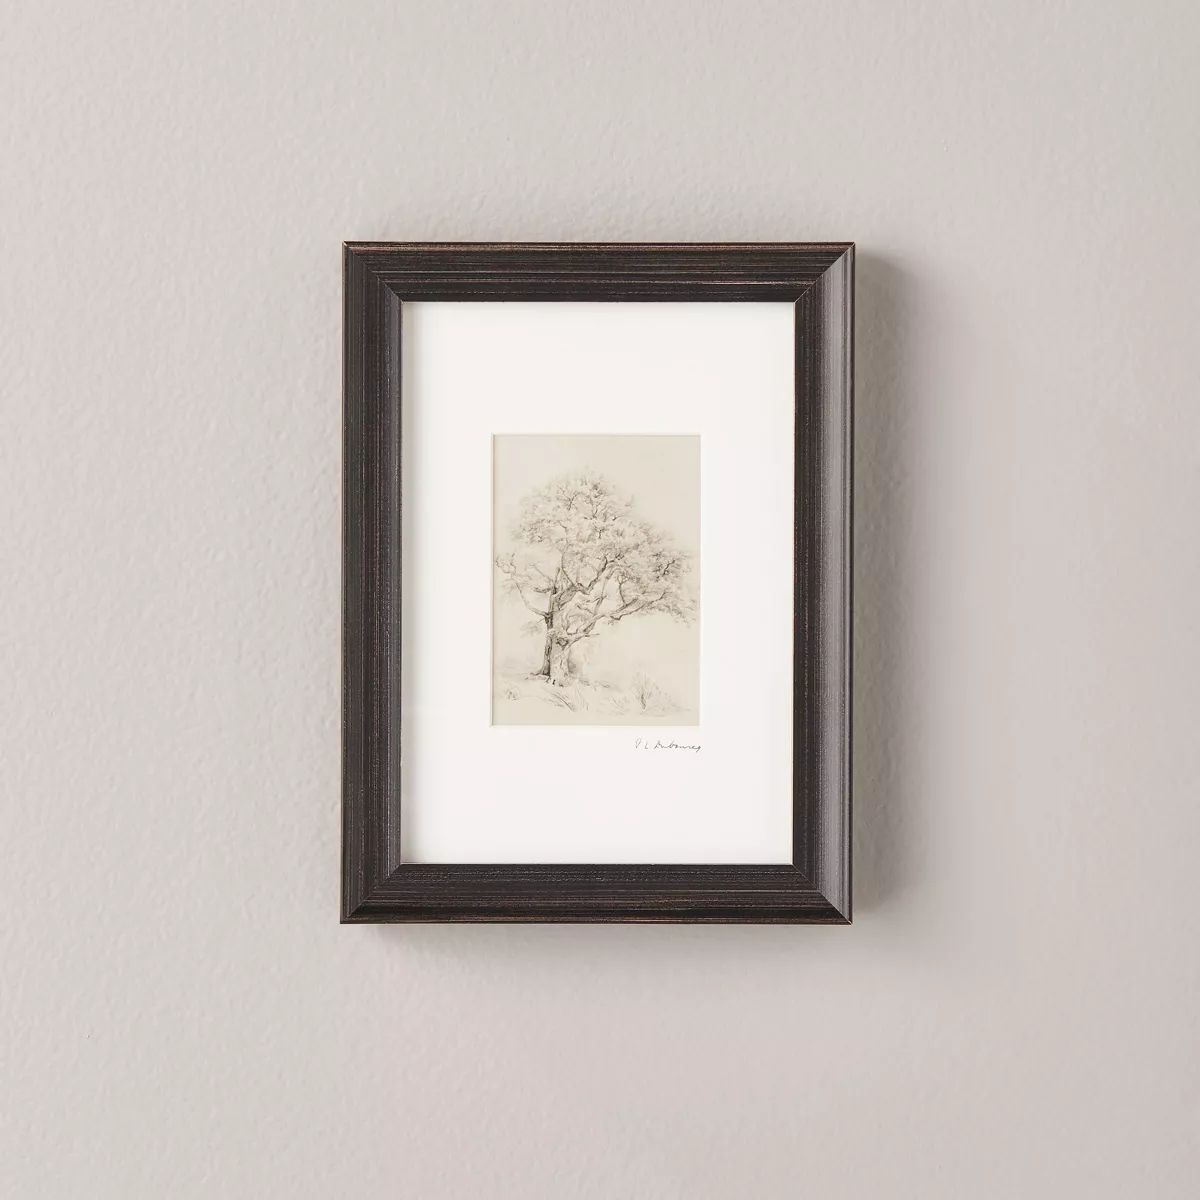 6"x8" Great Oak Tree Sketch Neutral Framed Wall Art - Hearth & Hand™ with Magnolia | Target